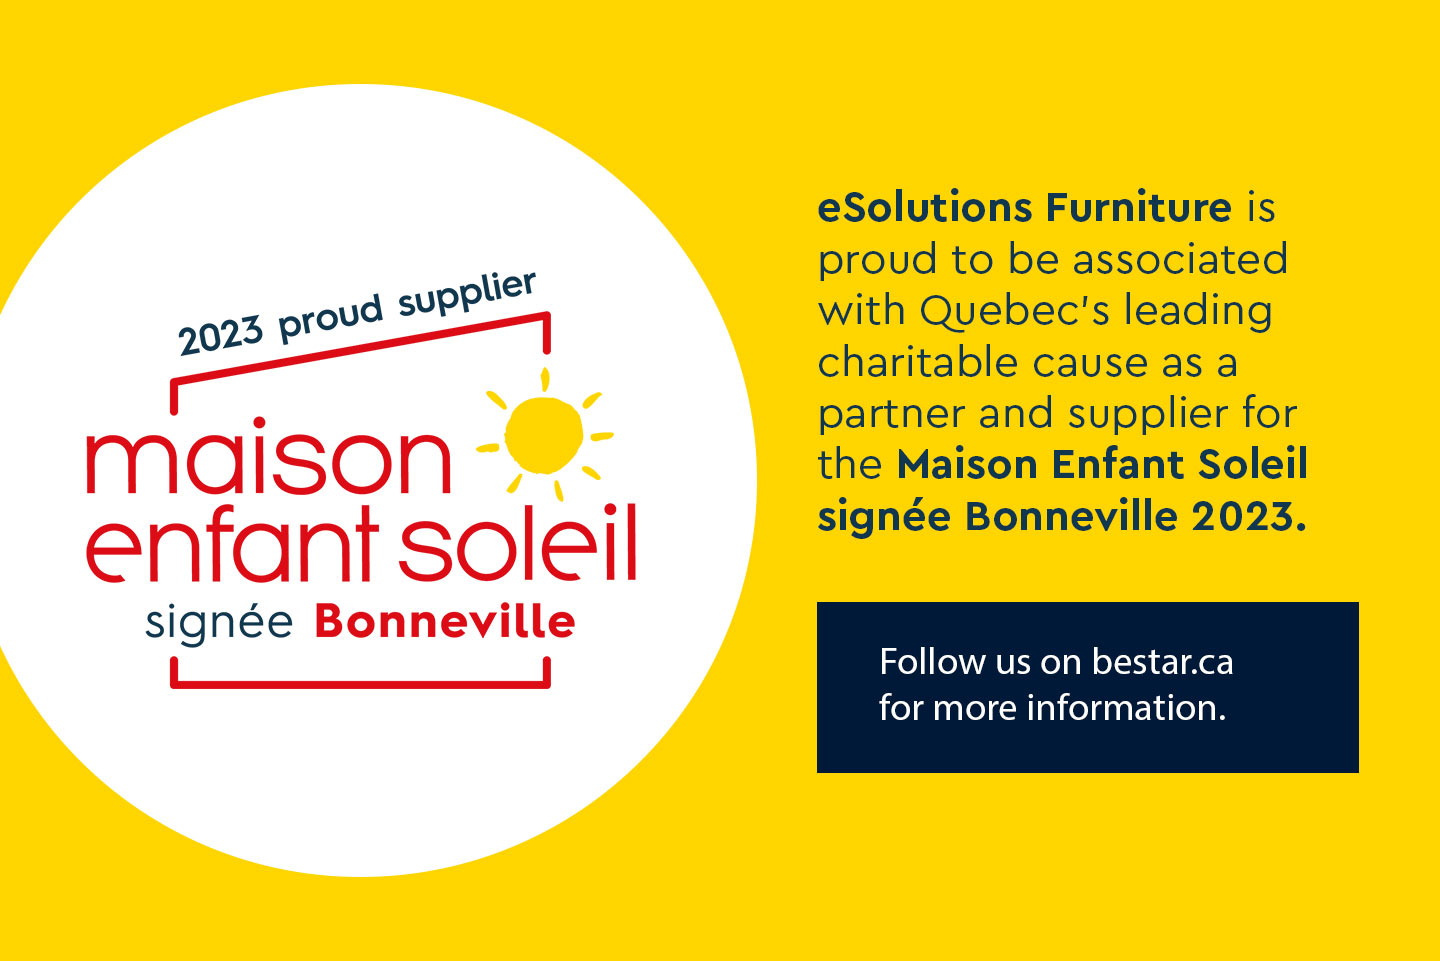 eSolutions is proud to be associated with Maison Enfant Soleil